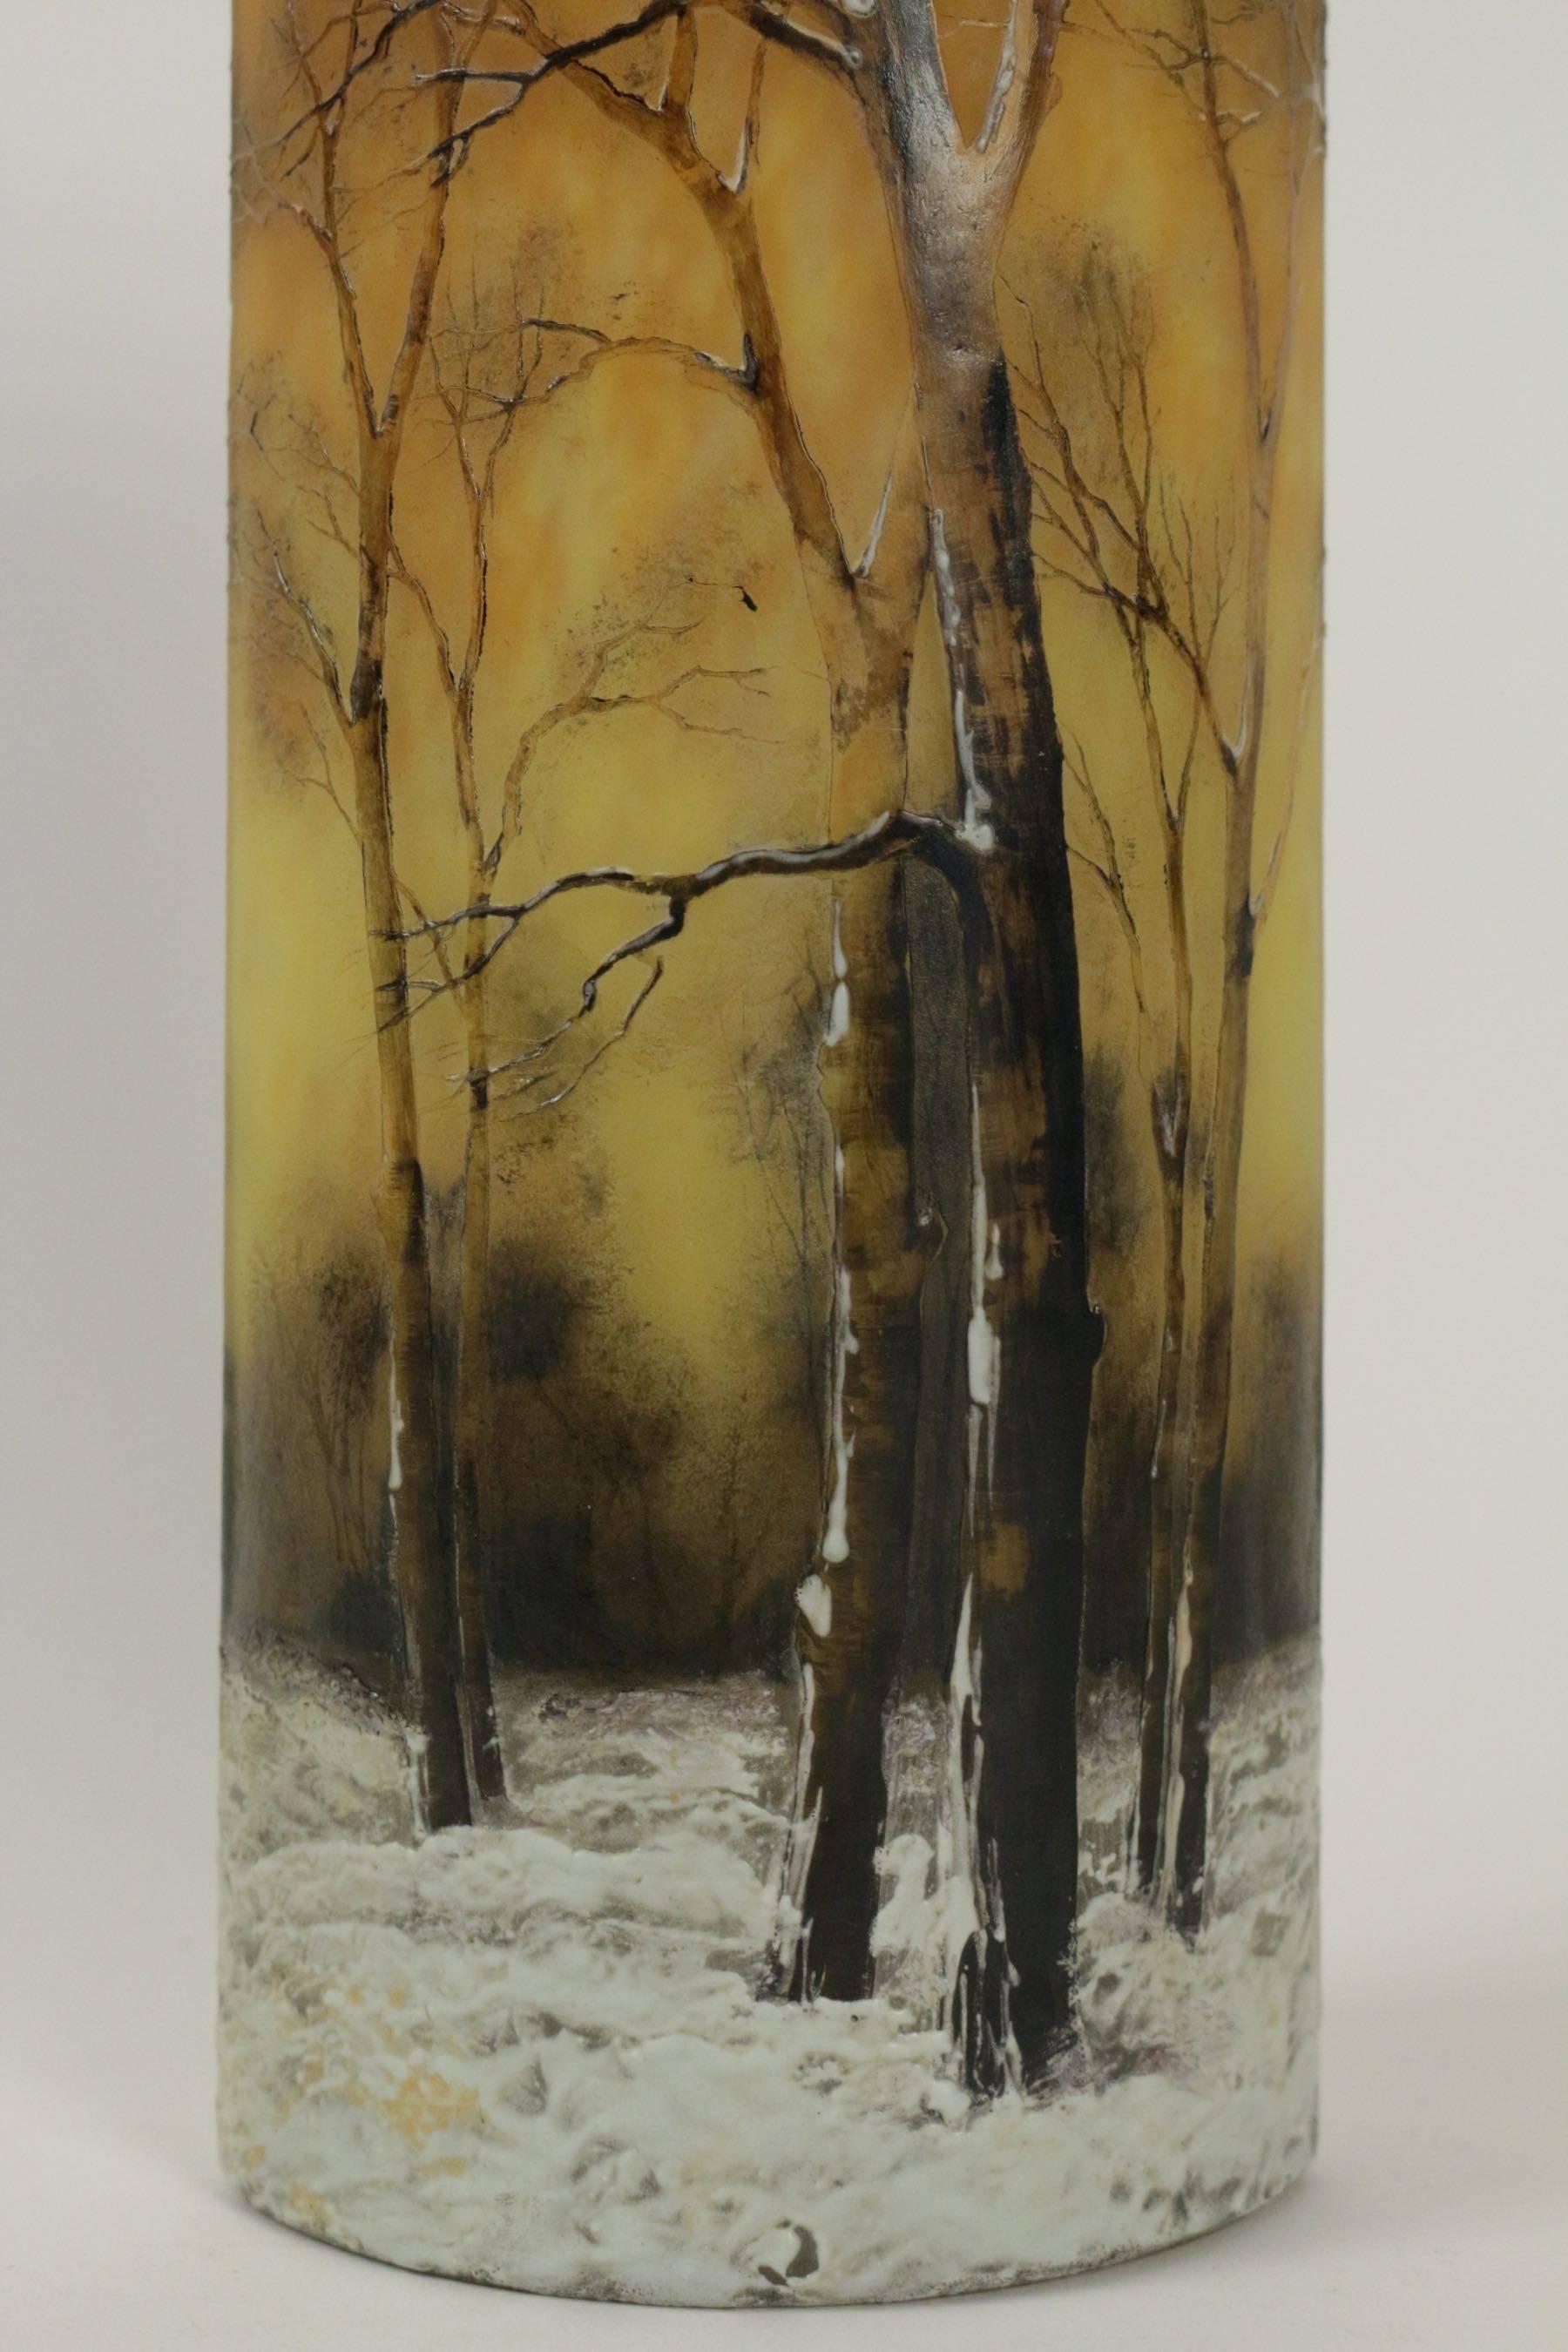 An enameled glass 'winter landscape' vase.
Enameled winter scene vase.
Daum vase has decoration of barren trees rising from snow covered ground against a mottled orange and yellow background. Trees are nicely enameled in shades of brown with white